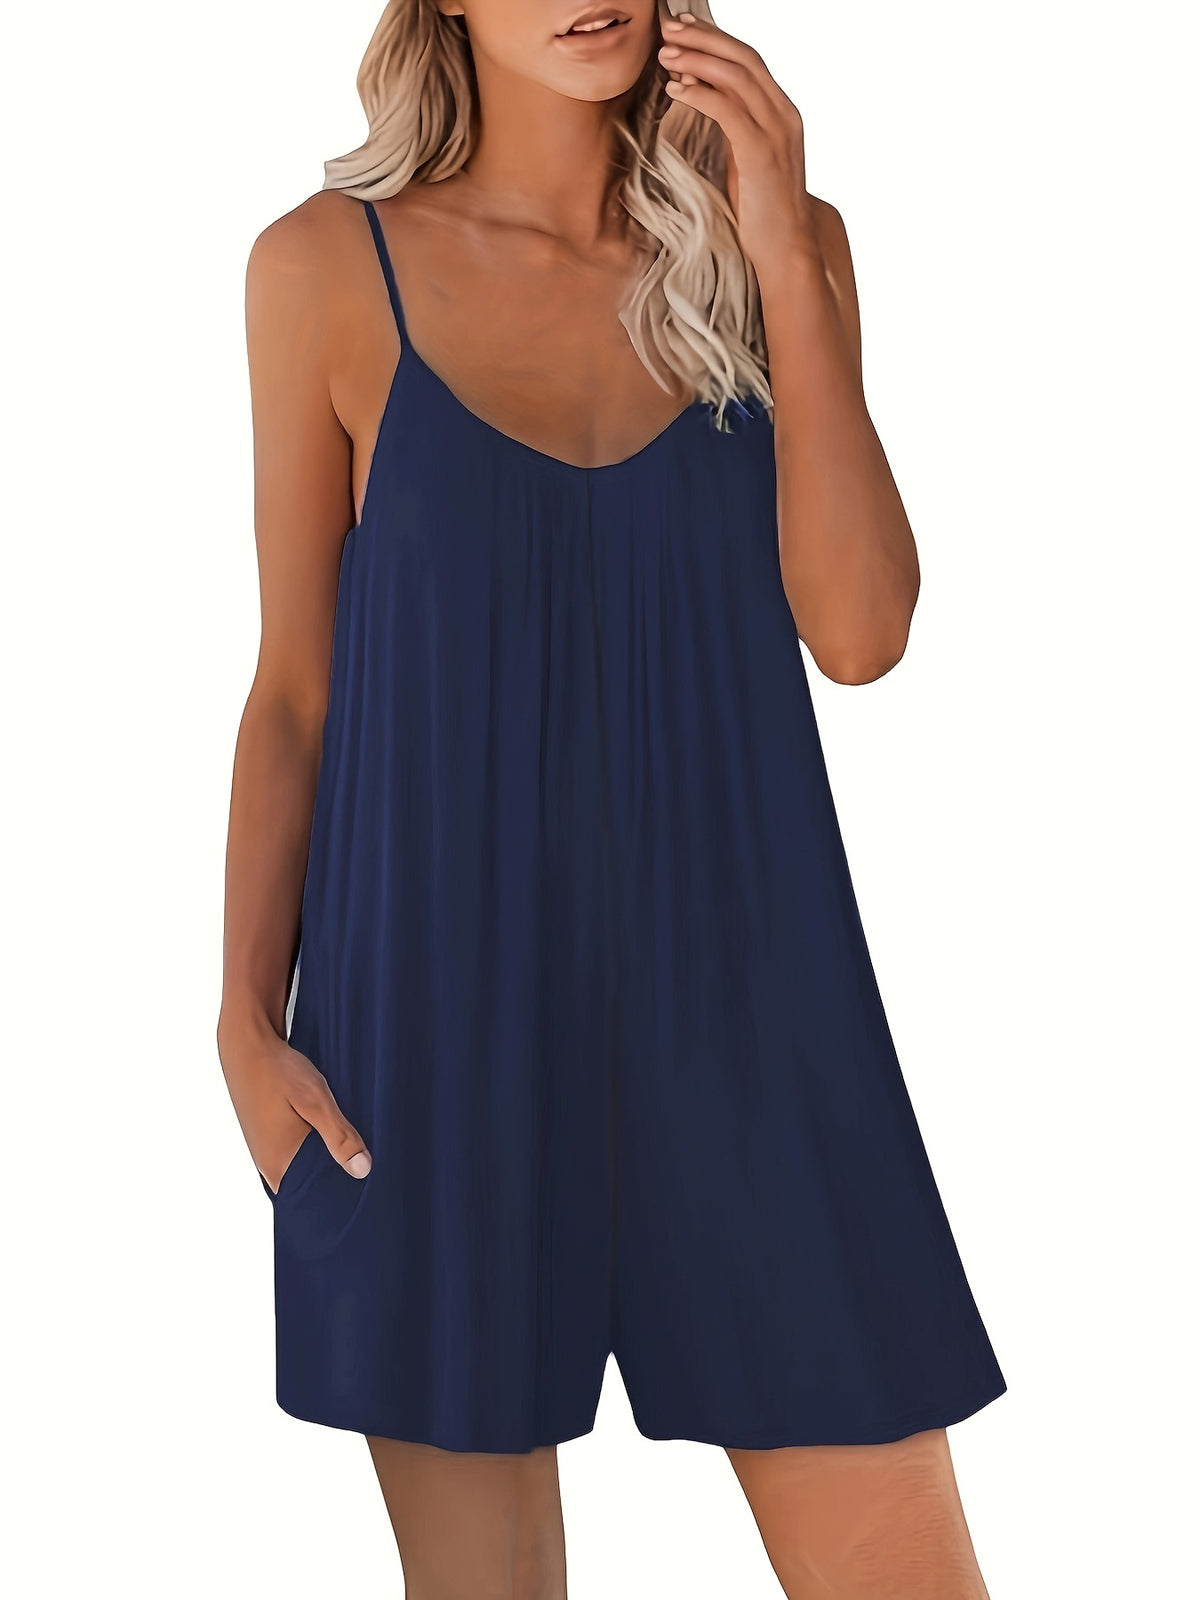 Solid Loose Cami Romper Jumpsuit, Casual Sleeveless Romper Jumpsuit, Women's Clothing